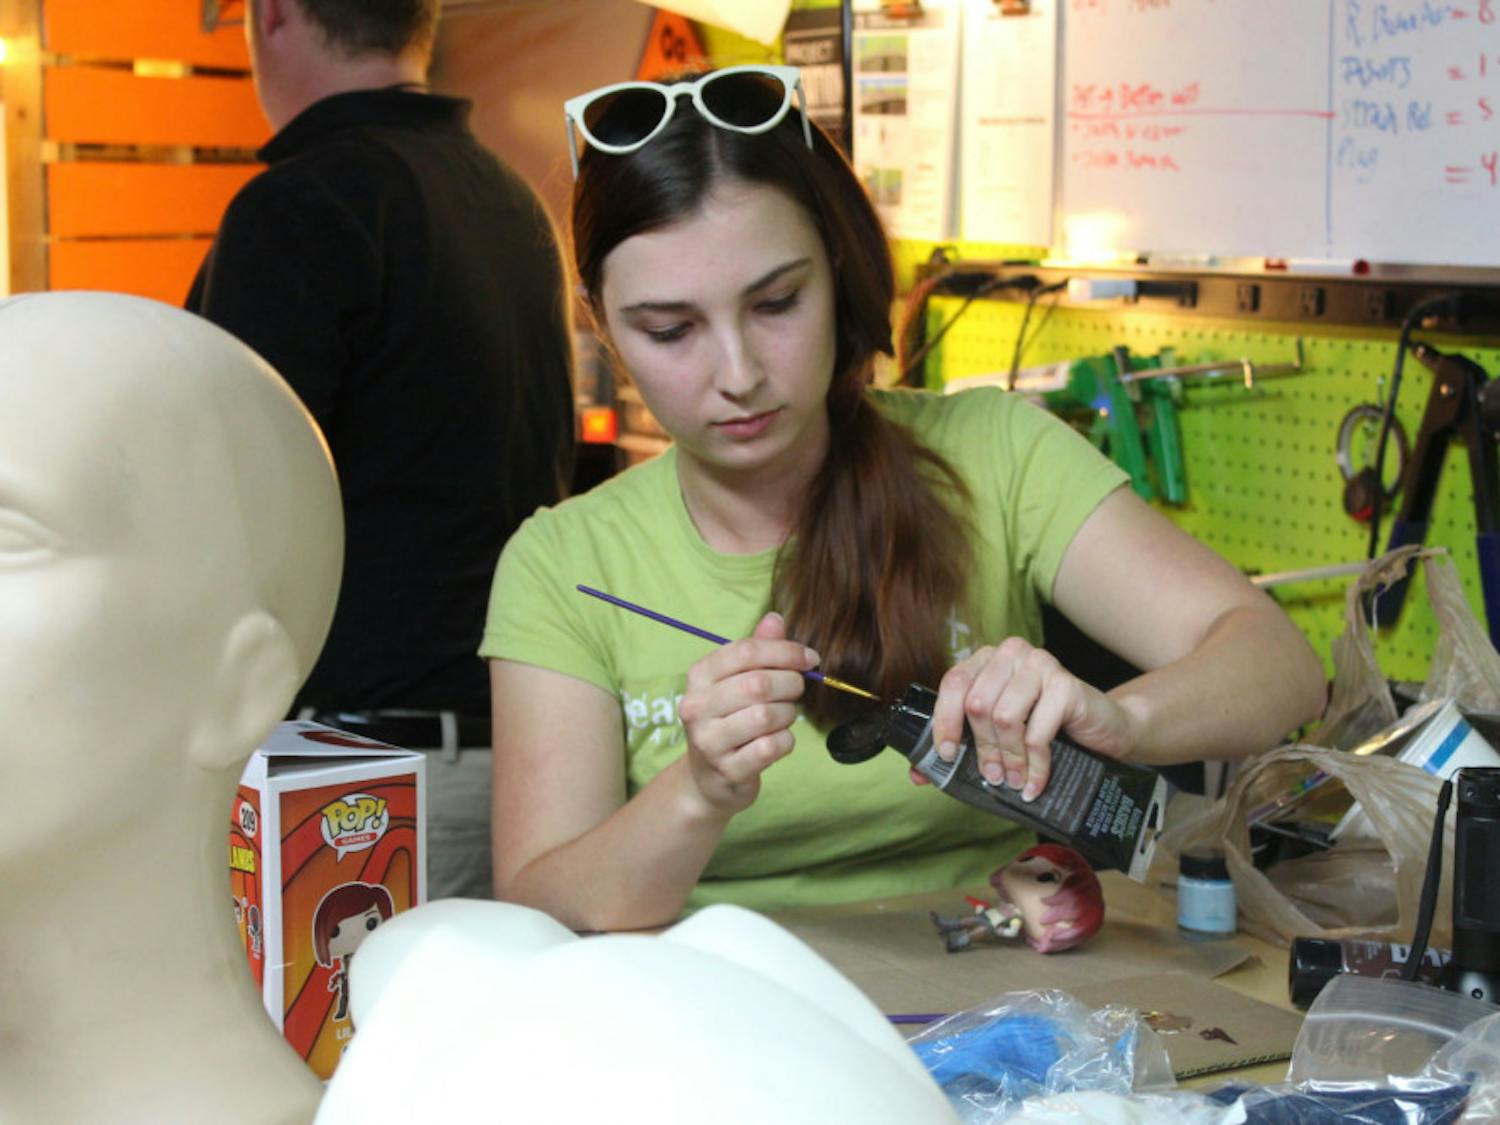 Jessica&nbsp;Hvozdovich, 24, repaints a figurine of Lilith from the video game "Borderlands 2." She was one of about 15 people who attended a cosplay workshop event at Hackerspace.